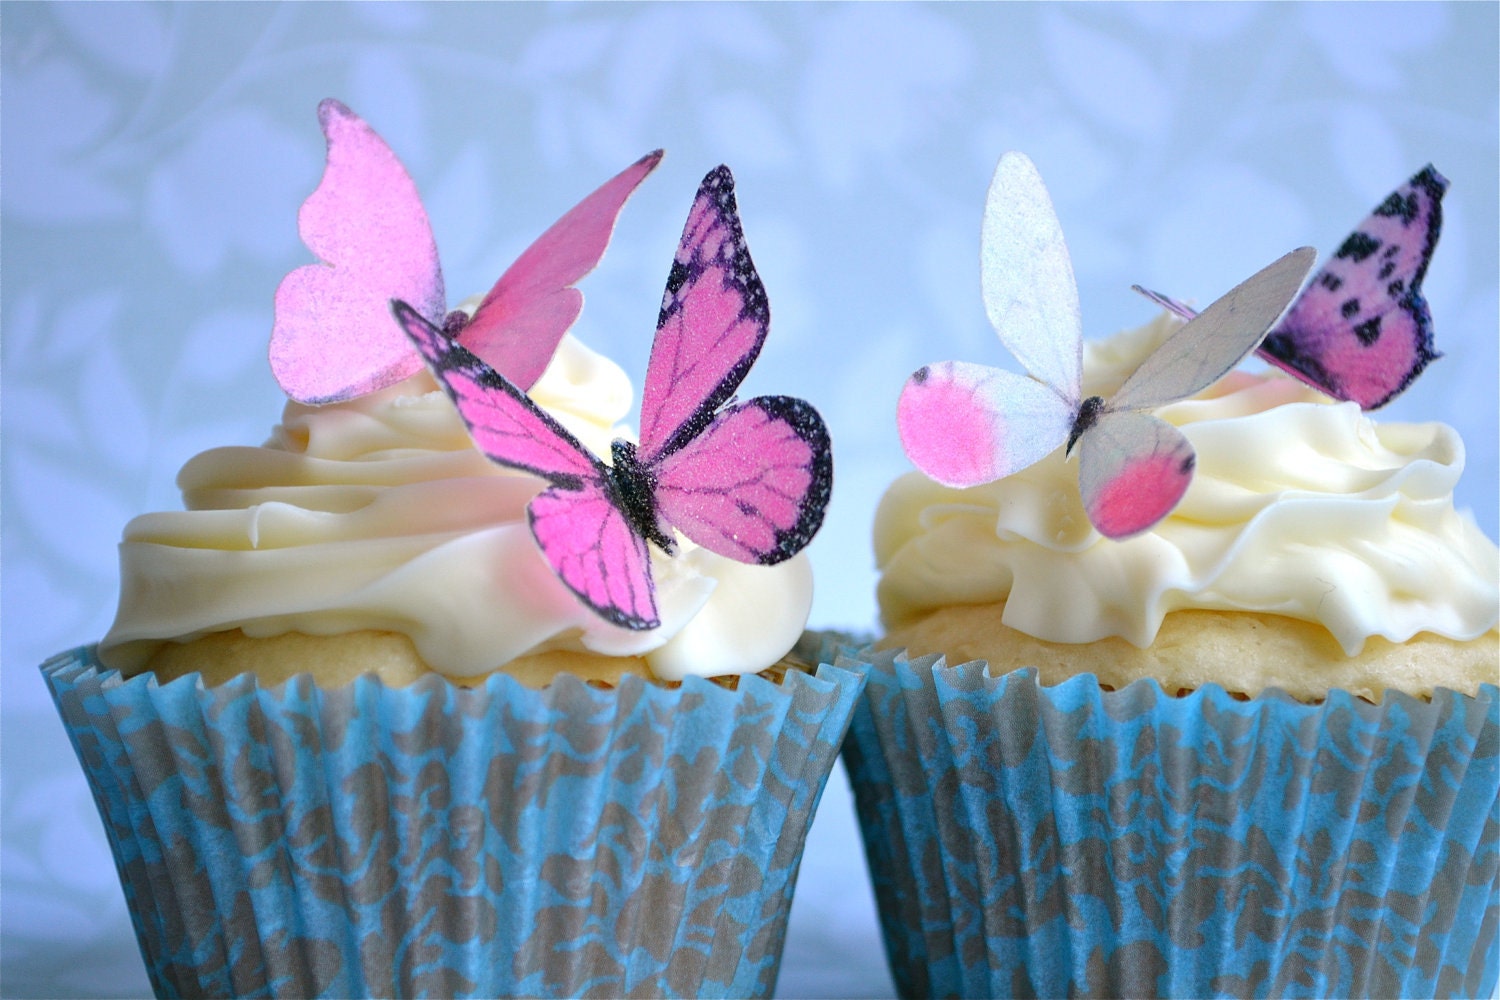 The Original EDIBLE BUTTERFLIES - Small Assorted Pink - Cake & Cupcake toppers - Food Accessories - SugarRobot